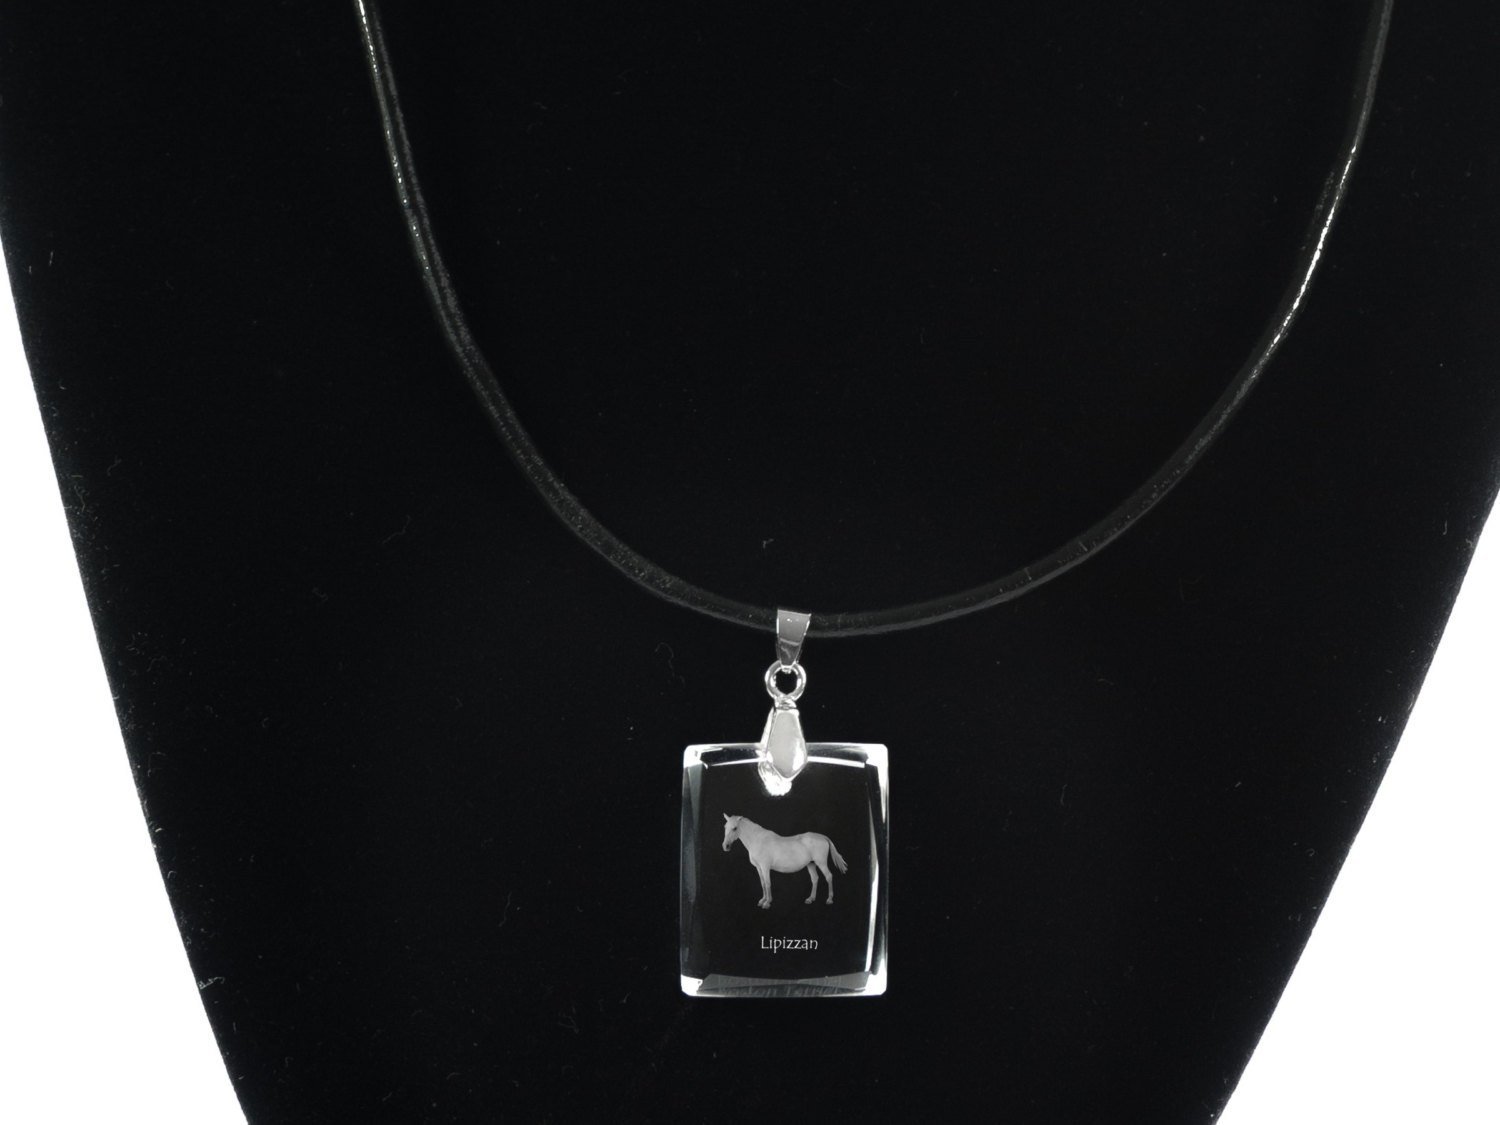 Primary image for Lipizzan,  Horse Crystal Necklace, Pendant, High Quality, Exceptional Gift